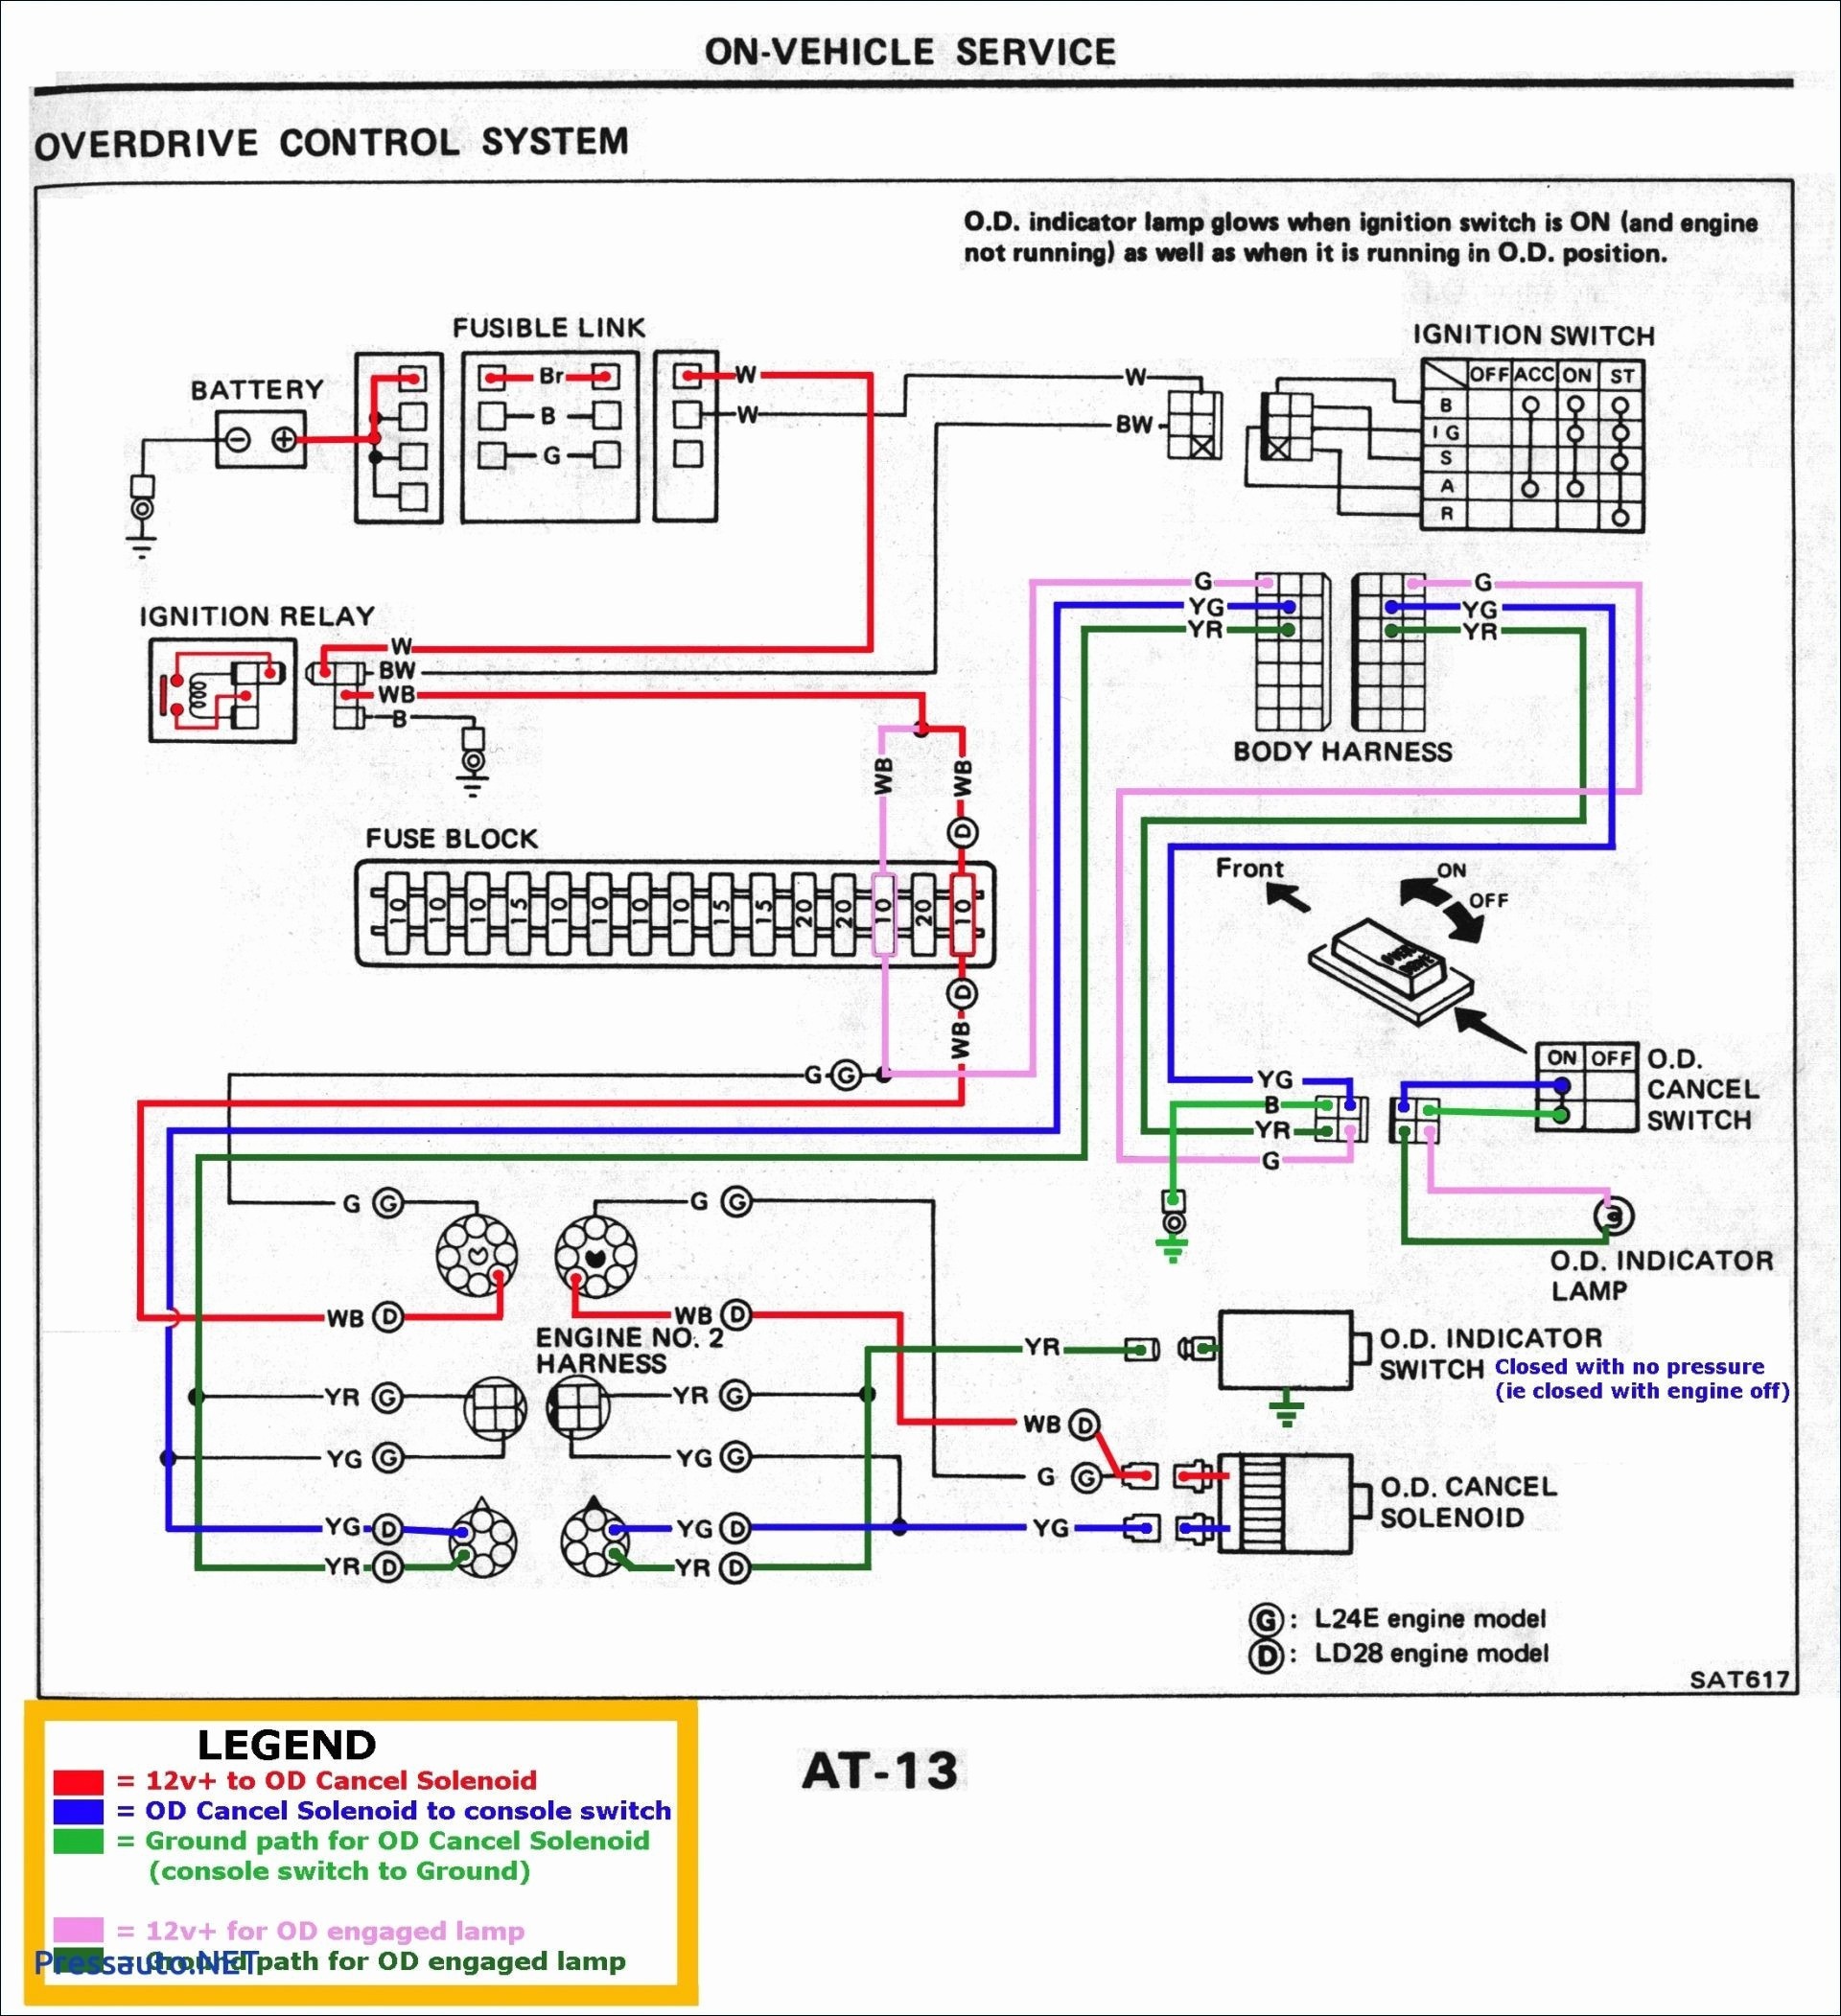 Fuel Line Diagram Chevy Truck 2000 Silverado Horn Wiring Diagram Free Picture Opinions About Of Fuel Line Diagram Chevy Truck